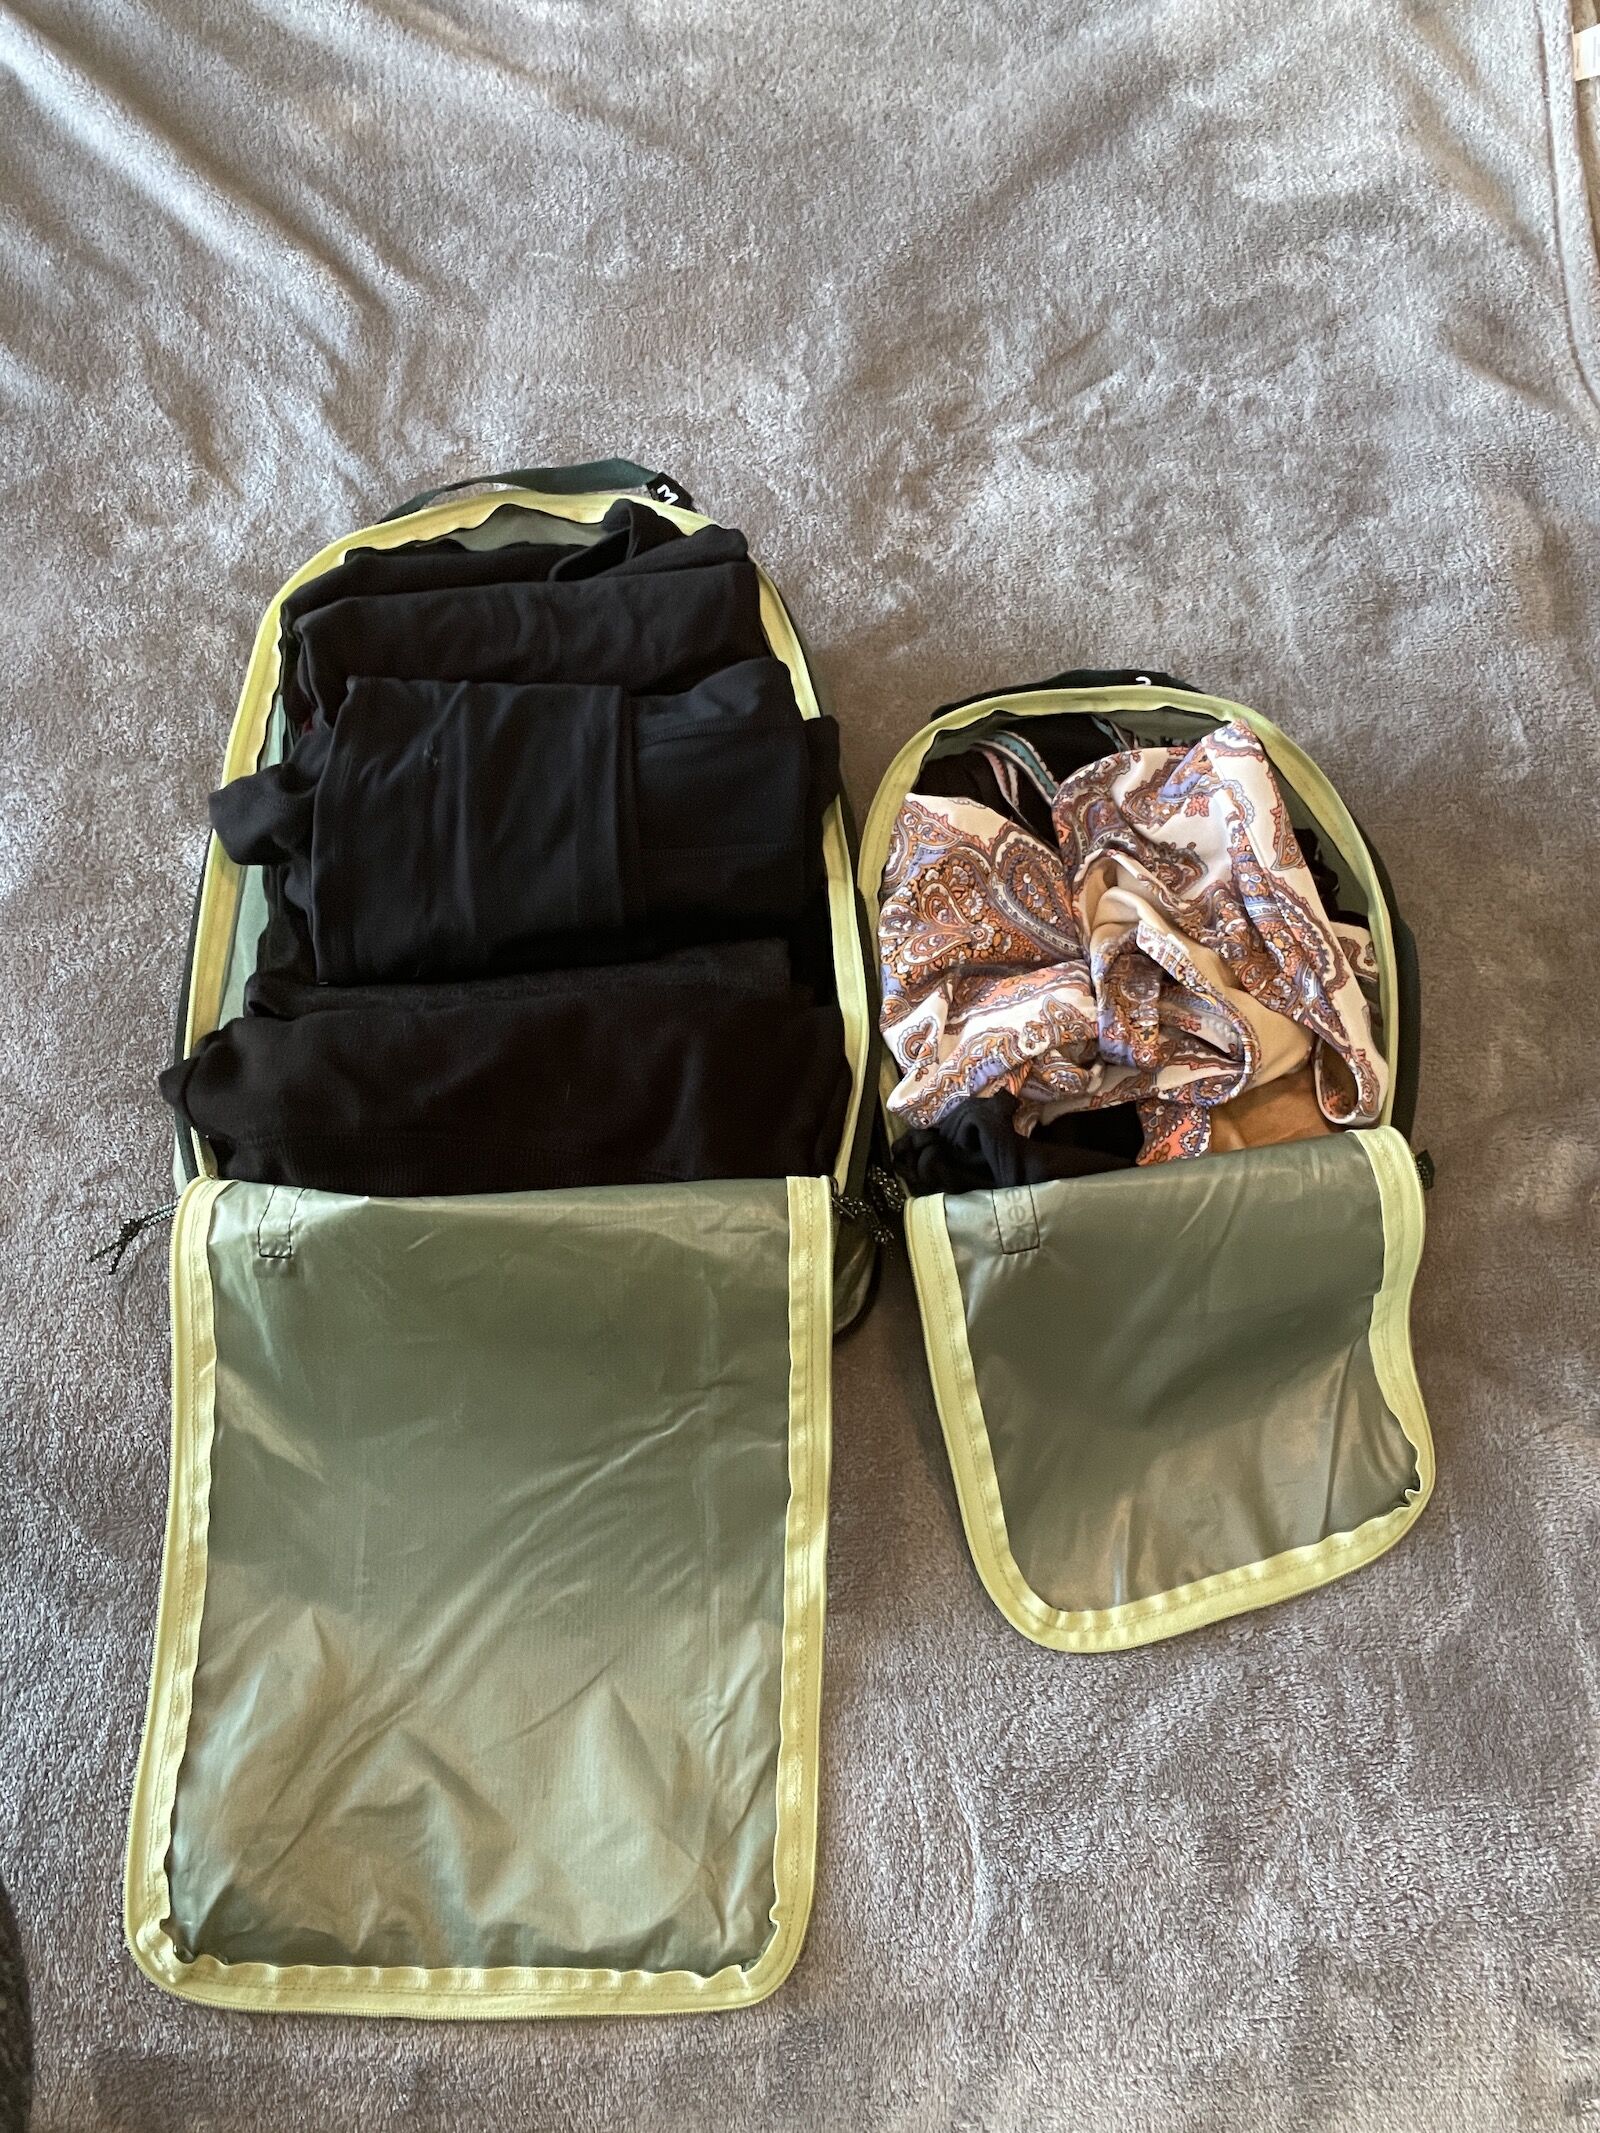 eagle creek pack-it isolate compression packing cubes with clothes